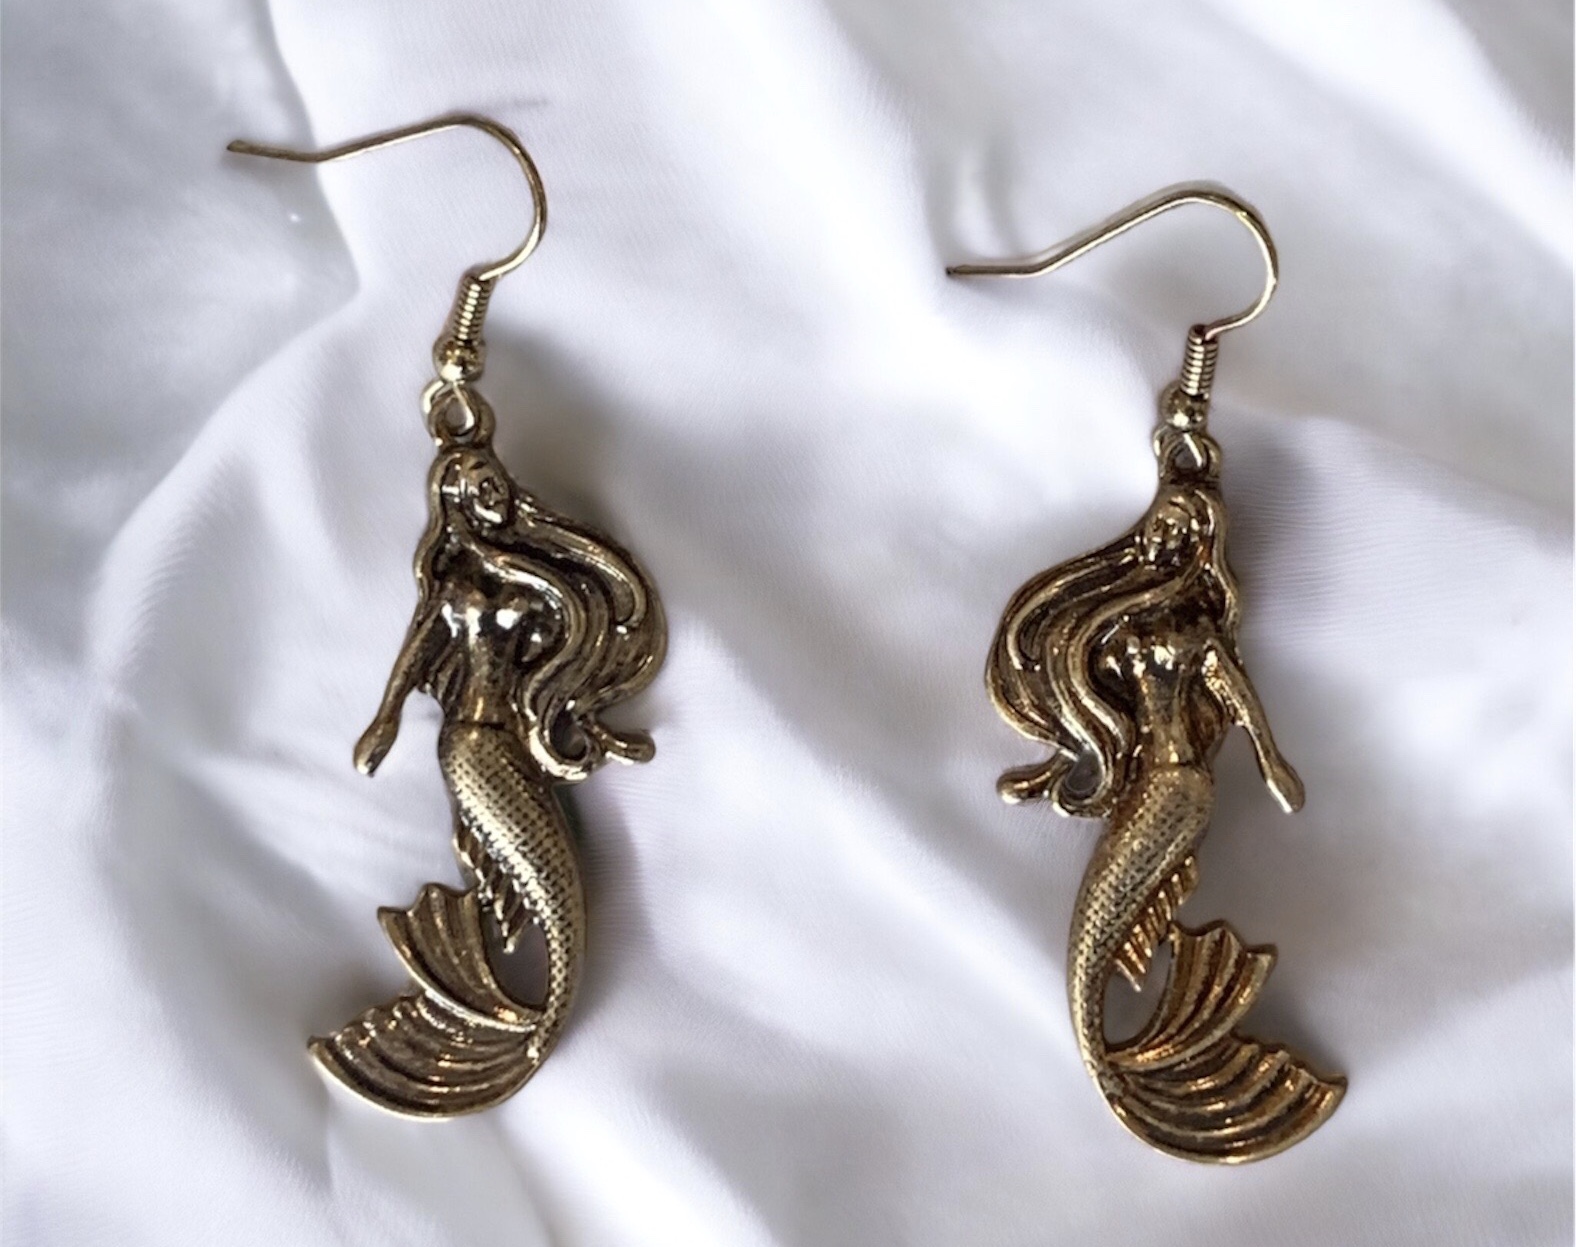 These beautiful earrings measure 2.25 inches long!